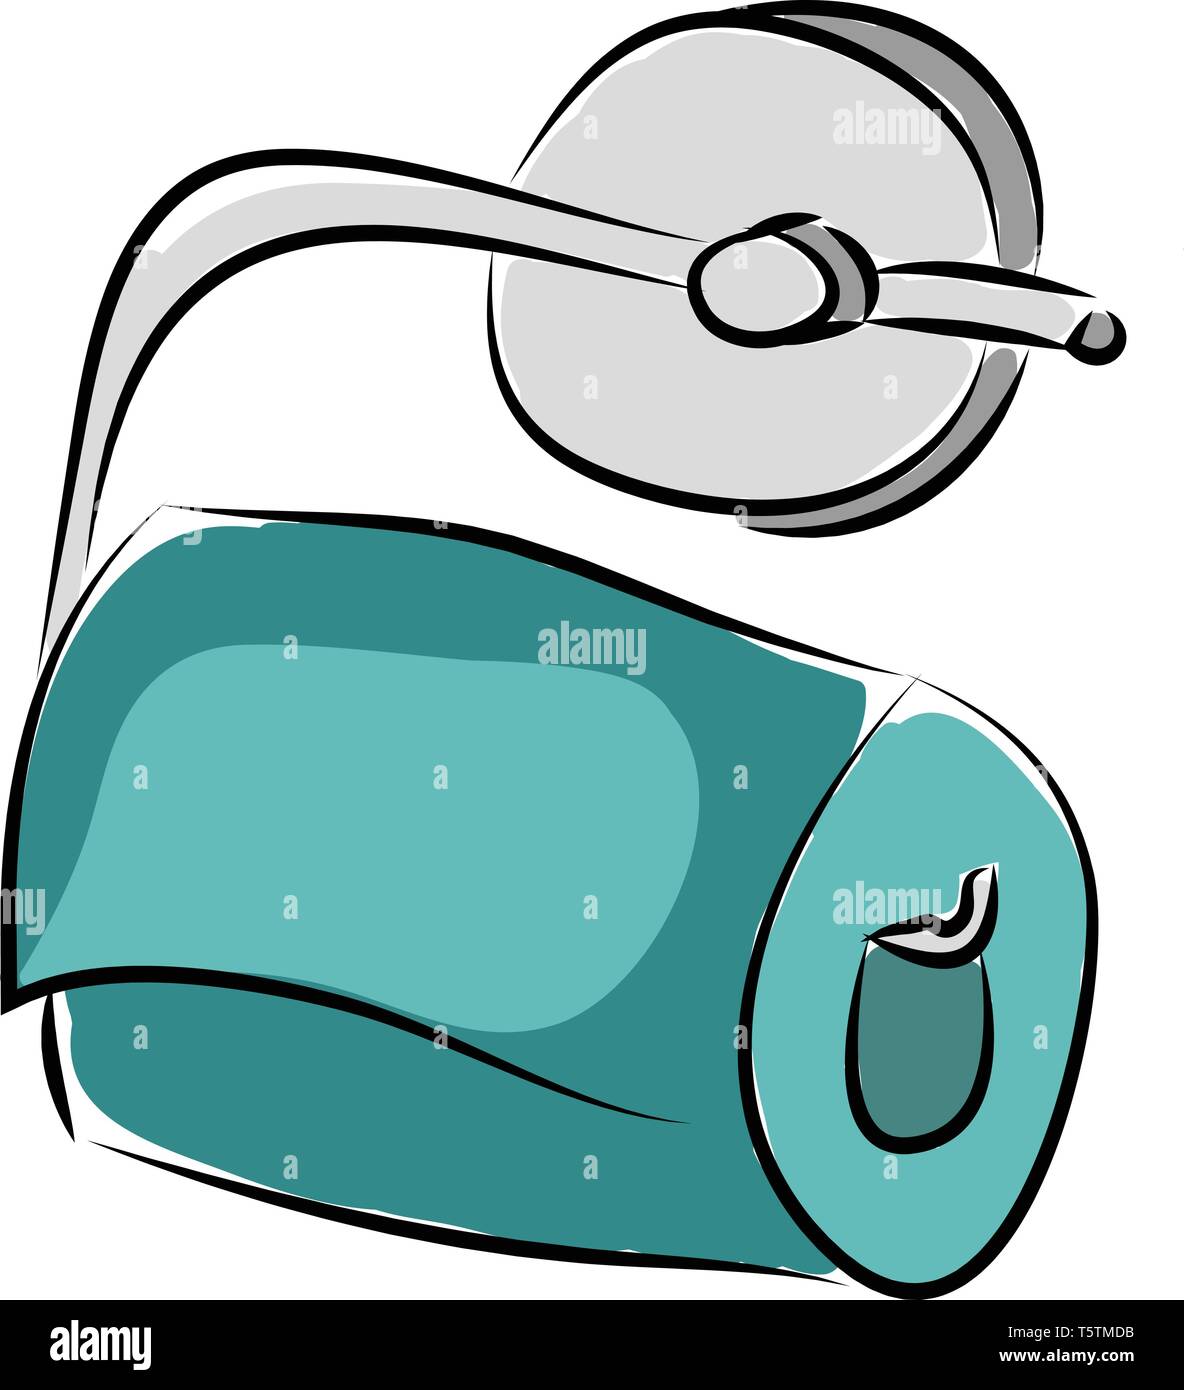 Toilet paper holder with blue paper roll vector illustration on white background Stock Vector